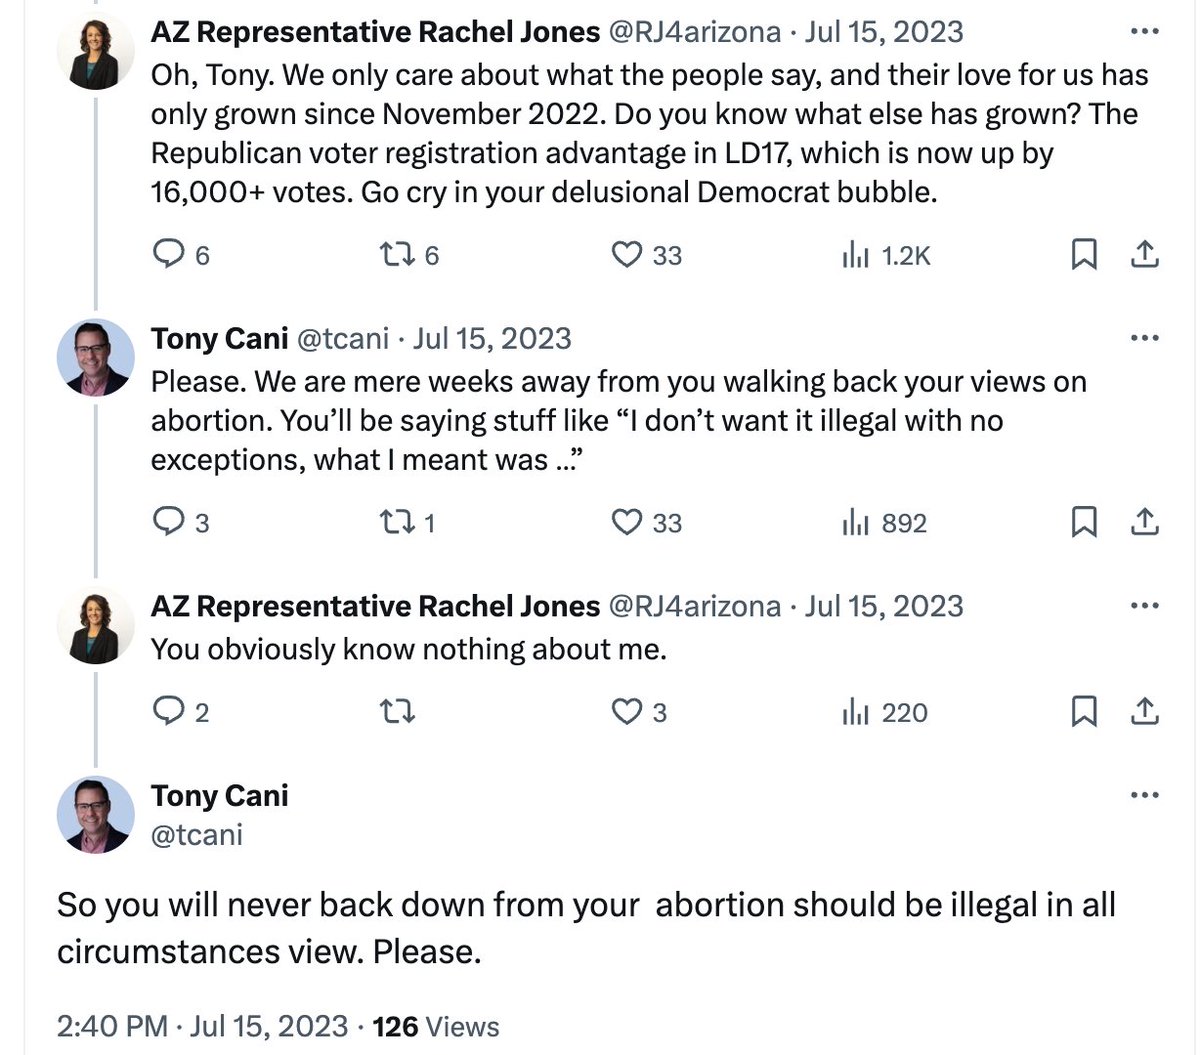 FLASHBACK to when Arizona Representative Rachel Jones and her seatmate Senator Wadsack made it very clear that they support abortion with no exceptions and would never water down their statements. Time for the voters to replace them.